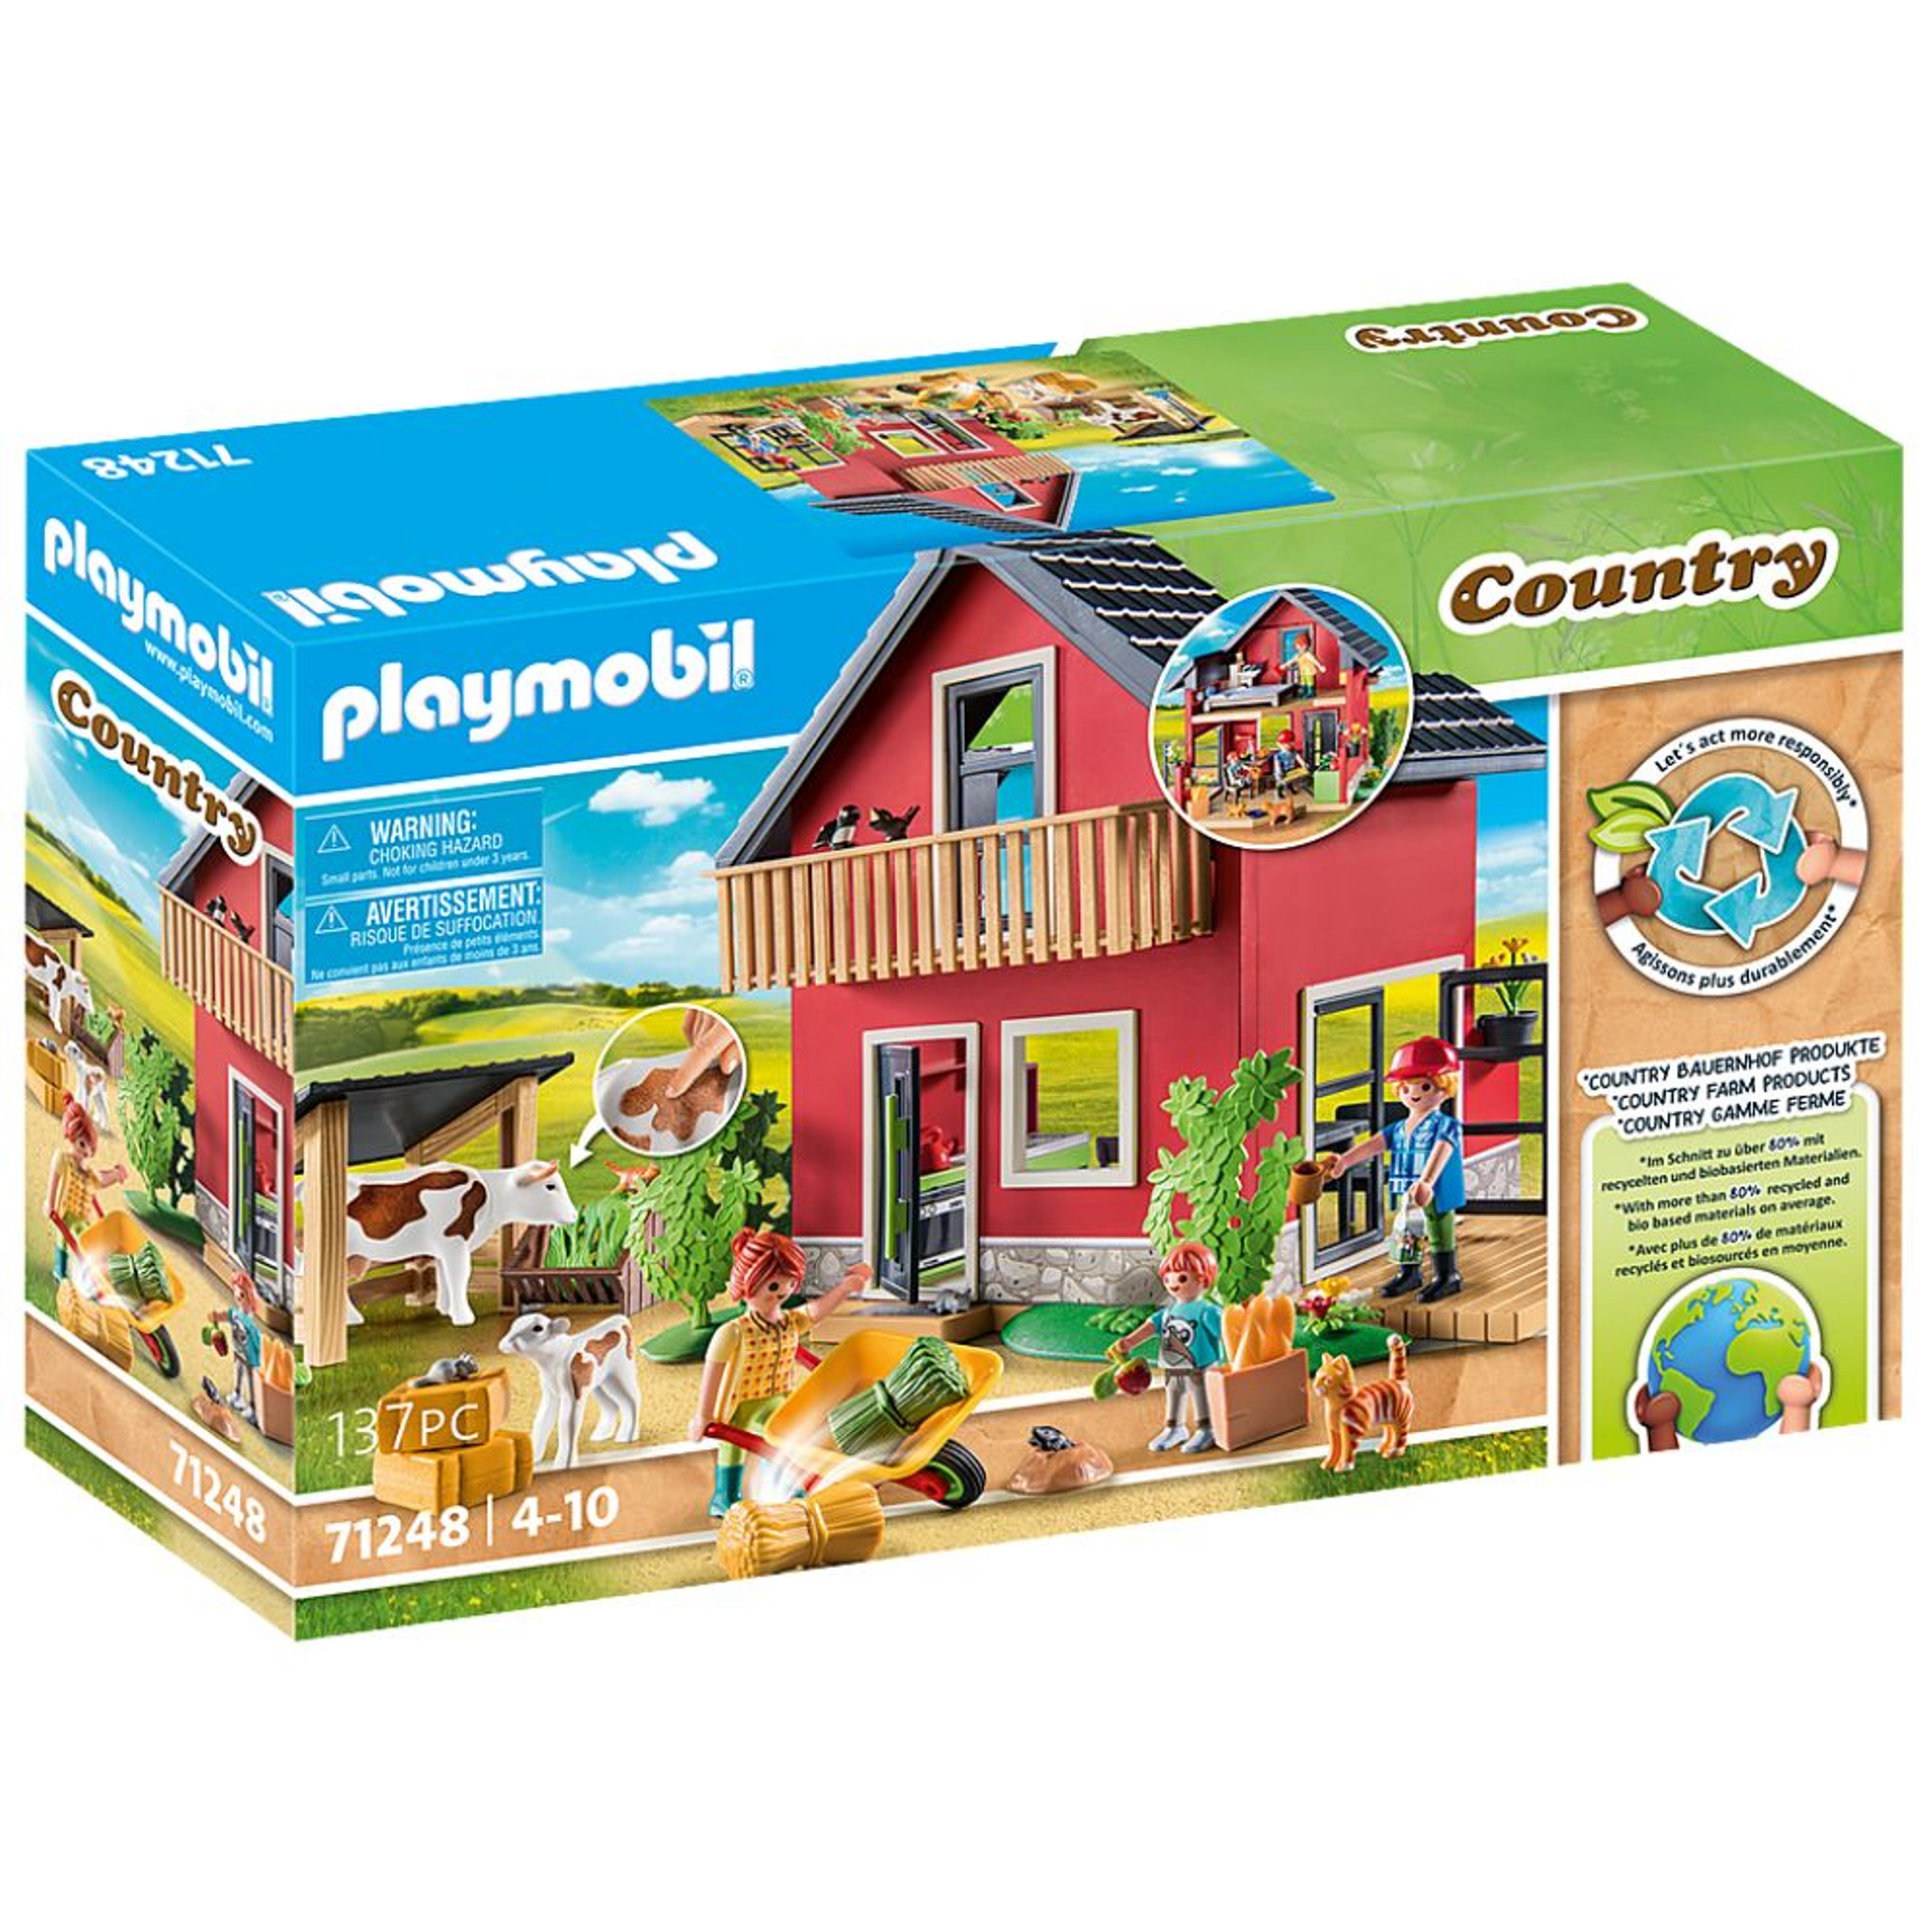 Playmobil Country Pigs and Sheep